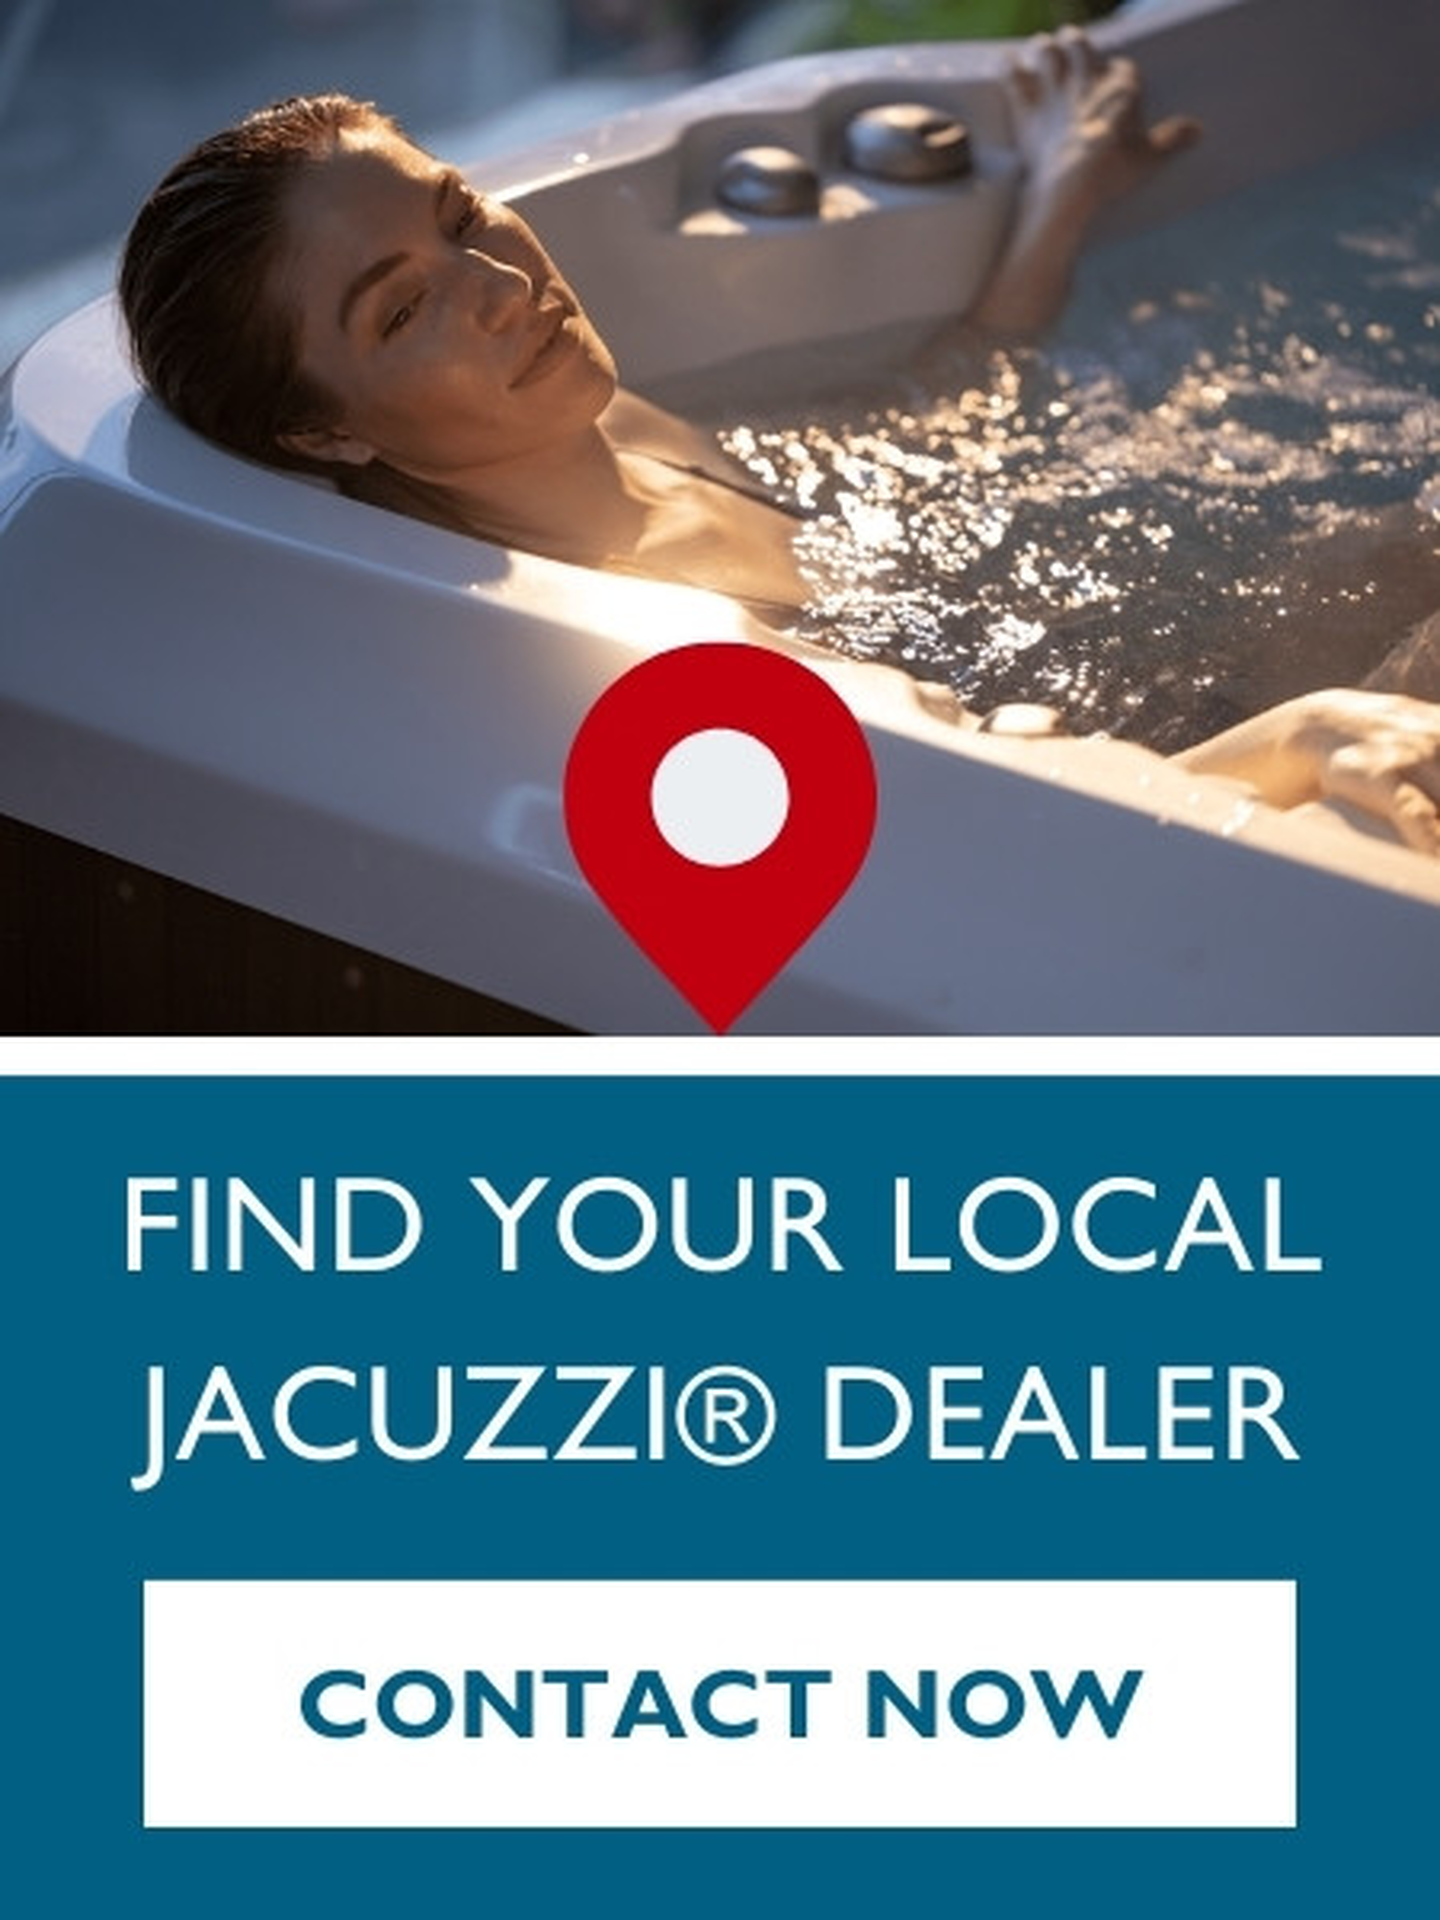 Find your local Jacuzzi® dealer